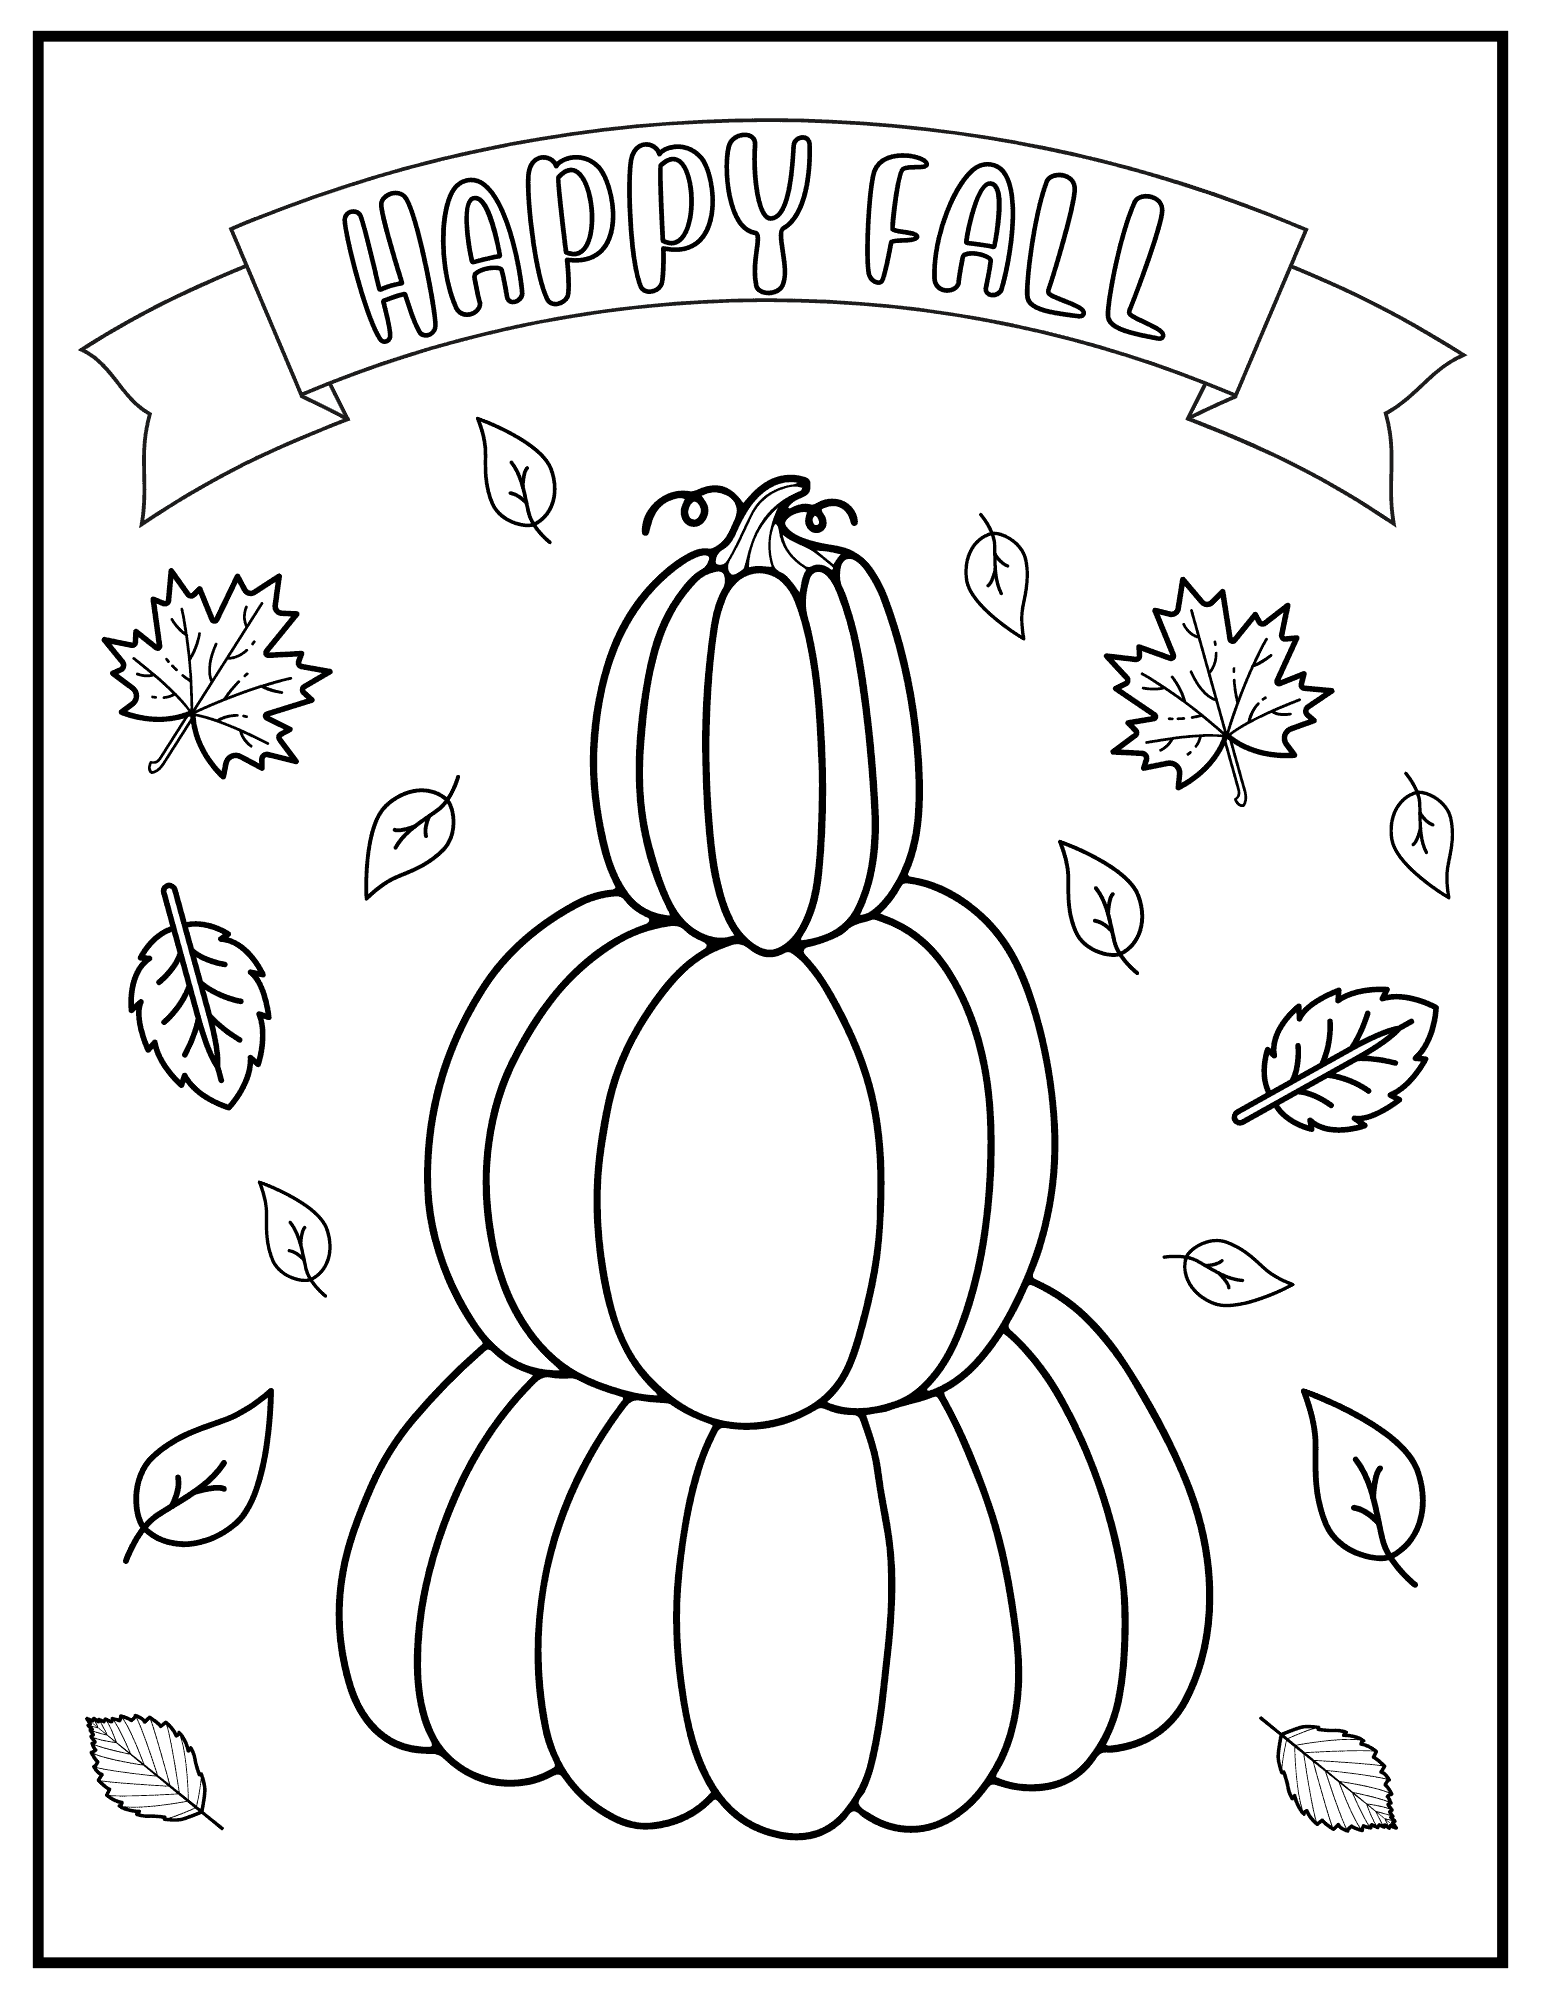 happy-fall-coloring-page